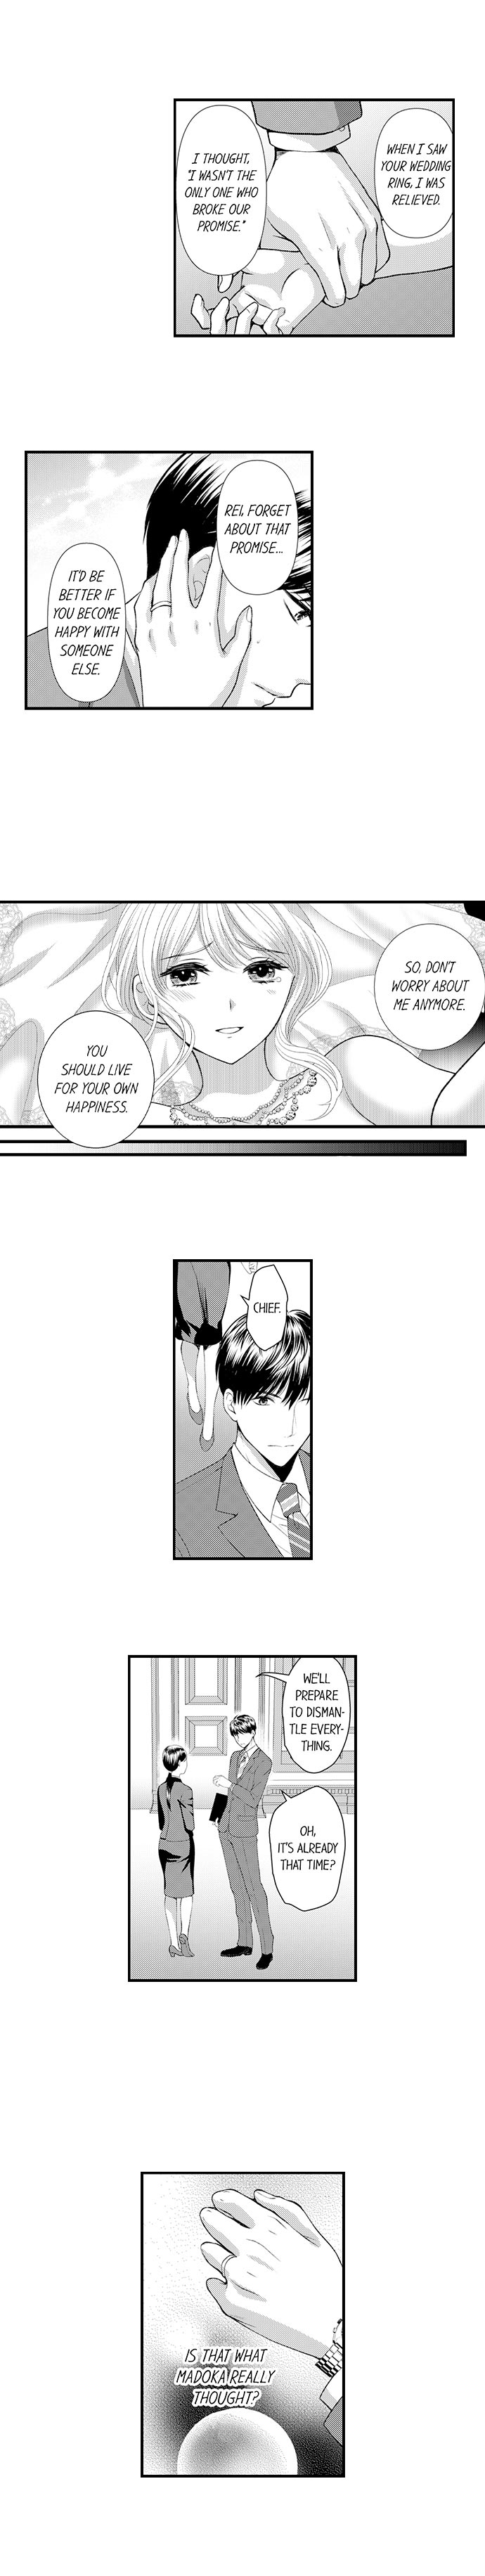 Cheating in a One-Sided Relationship - Chapter 9 Page 4